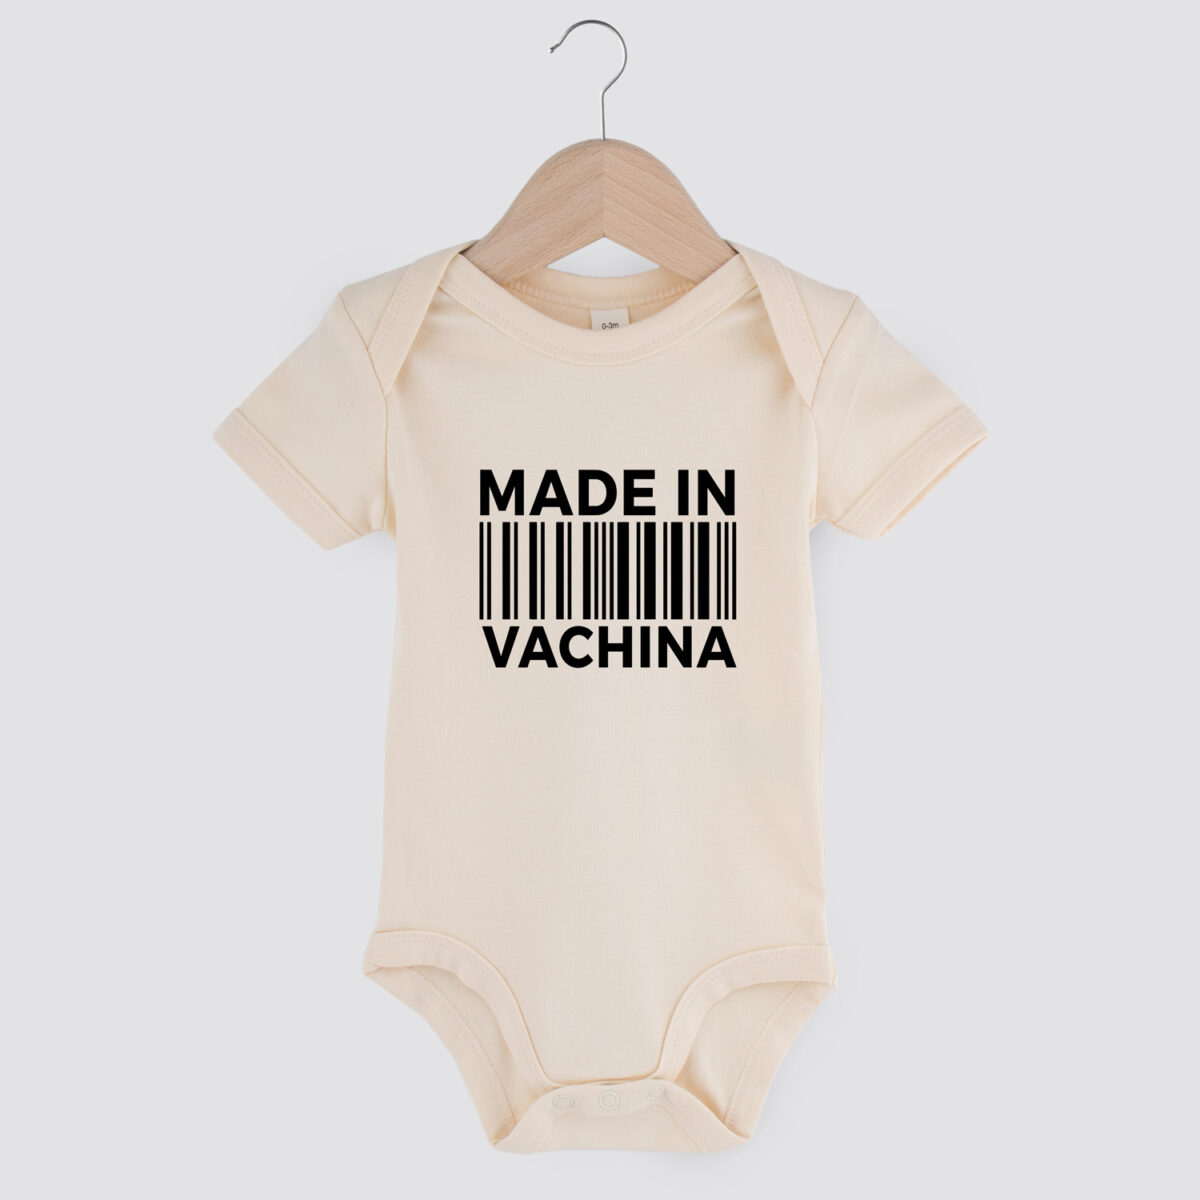 made in vachina, baby romper, grappig, funny